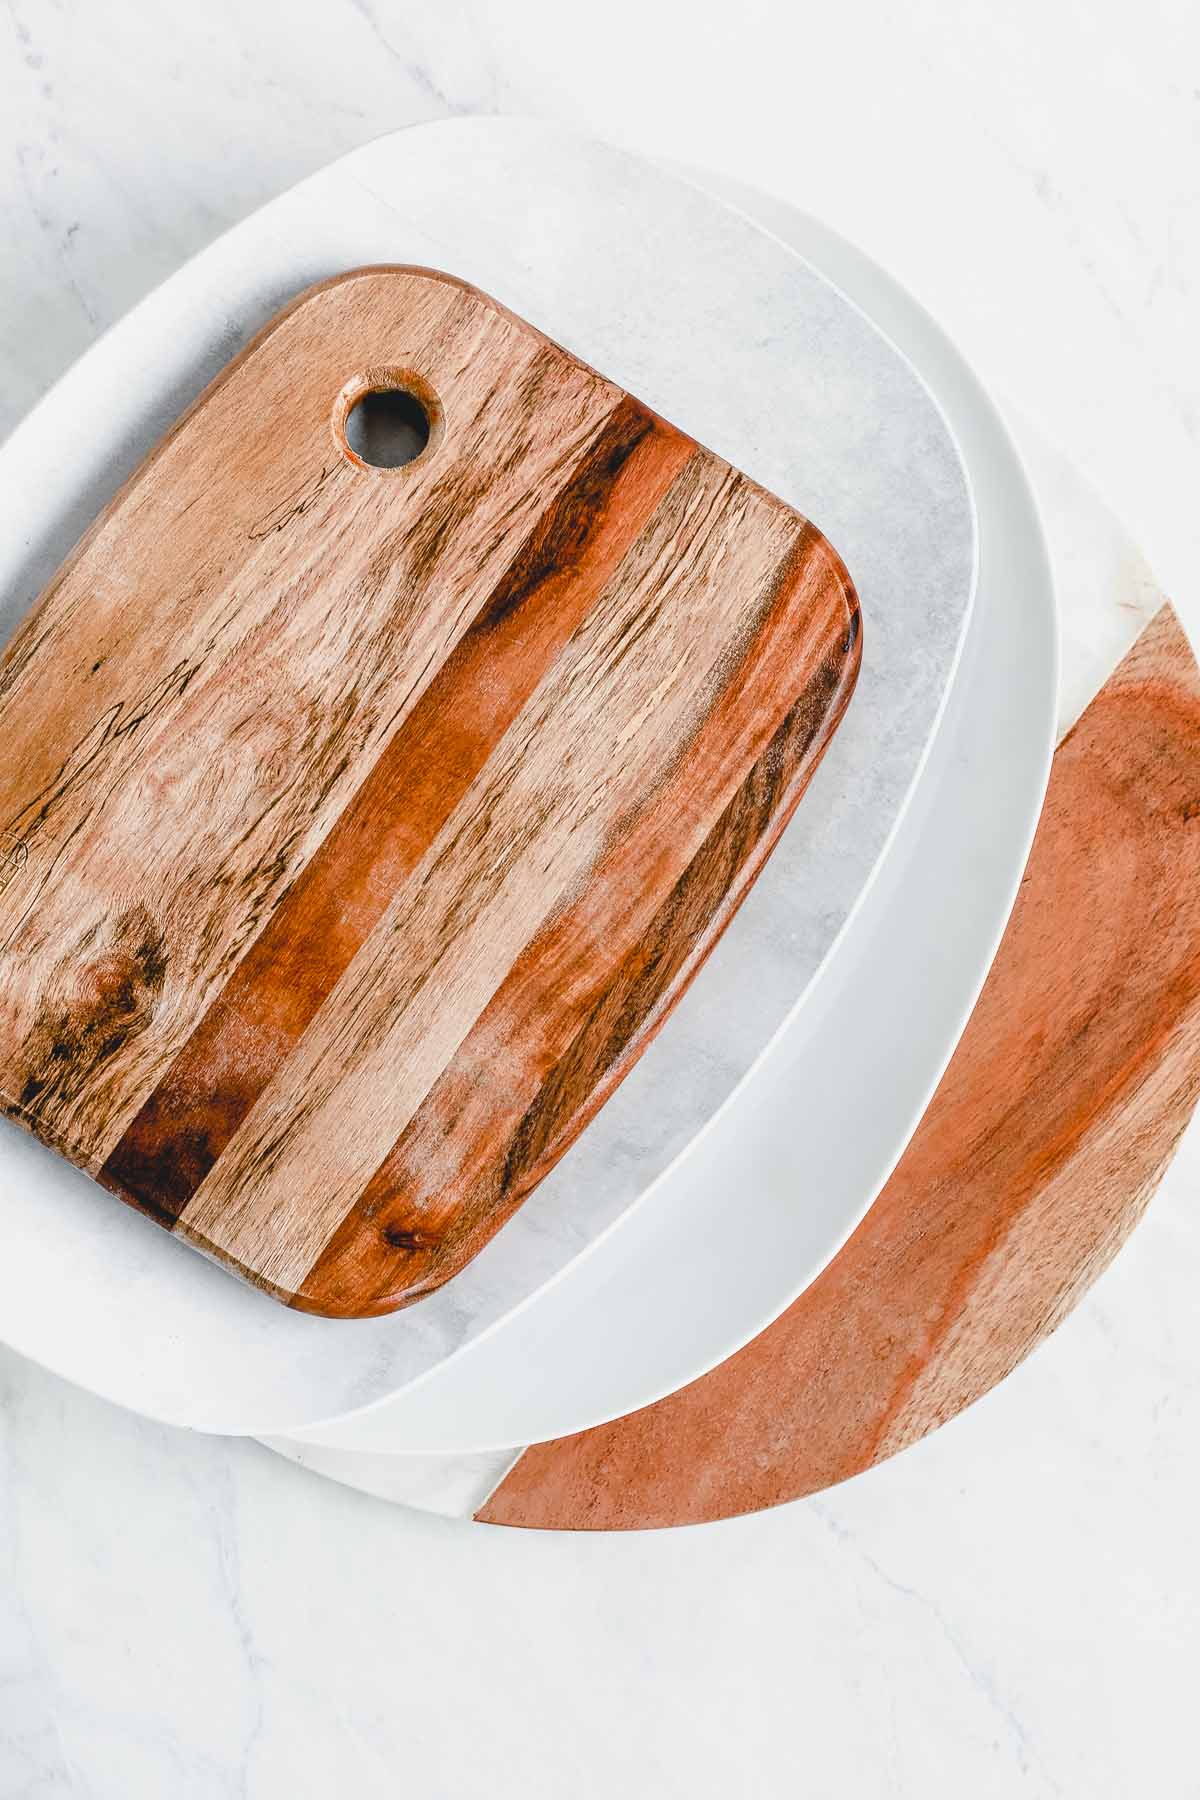 wooden boards and plates to use for a cheese board